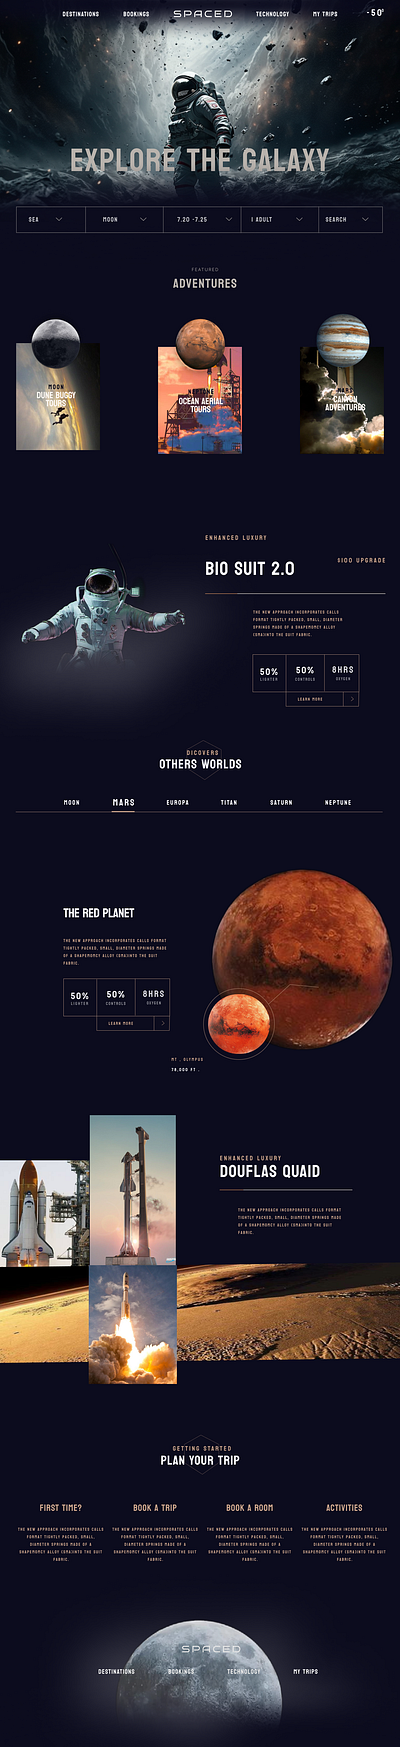 Explore The Galaxy galaxy landing page landing page ui uiux user experience user interface ux design website